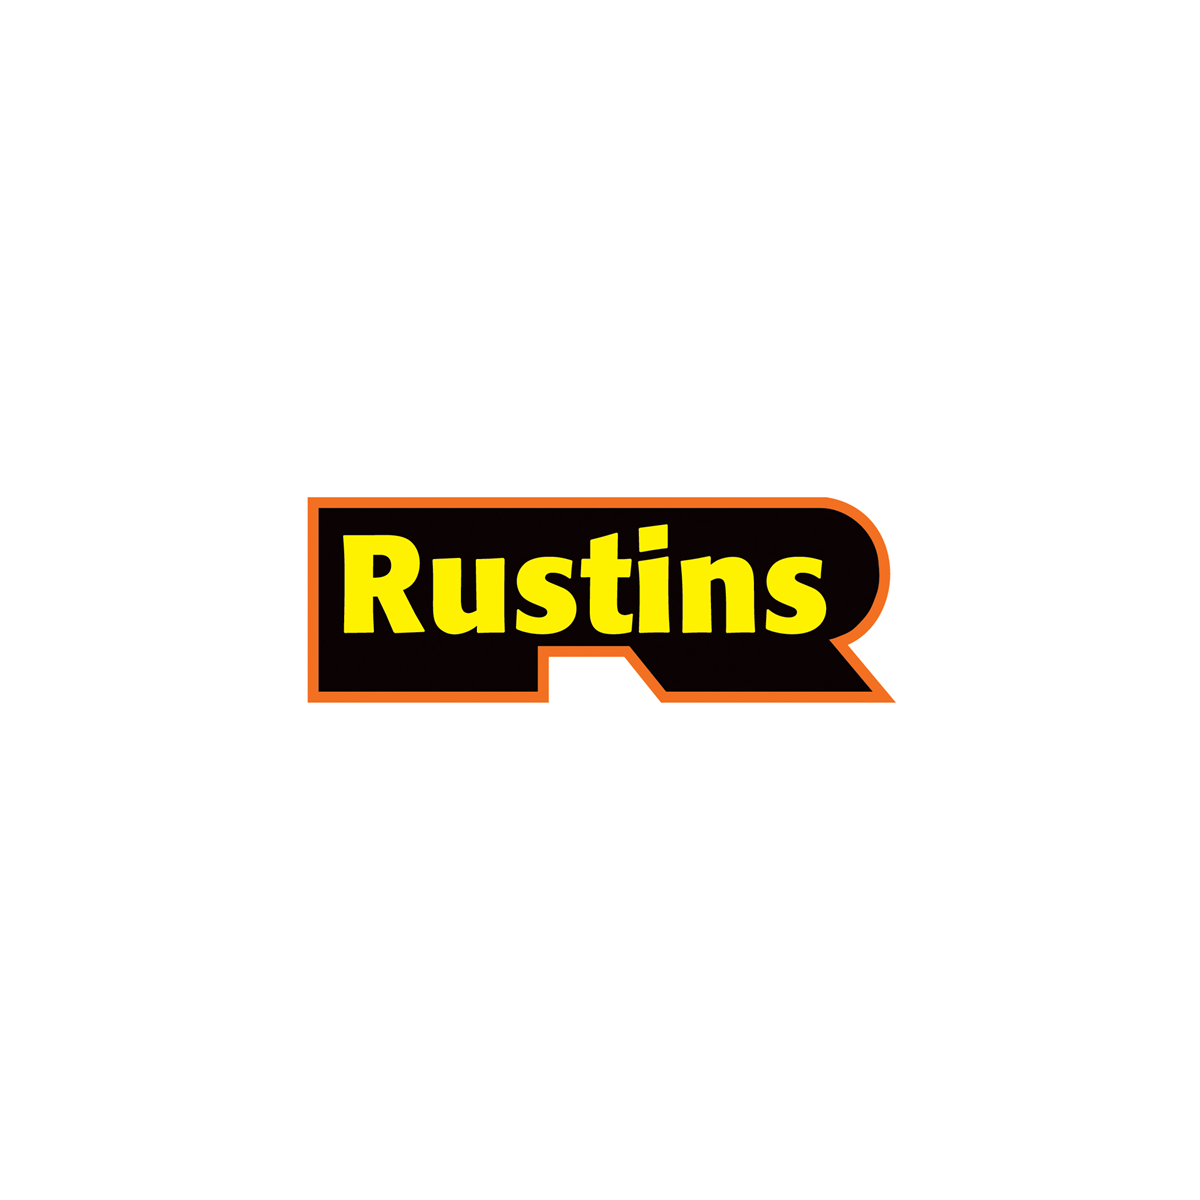 Where to buy Rustins Brick and Tile Paint